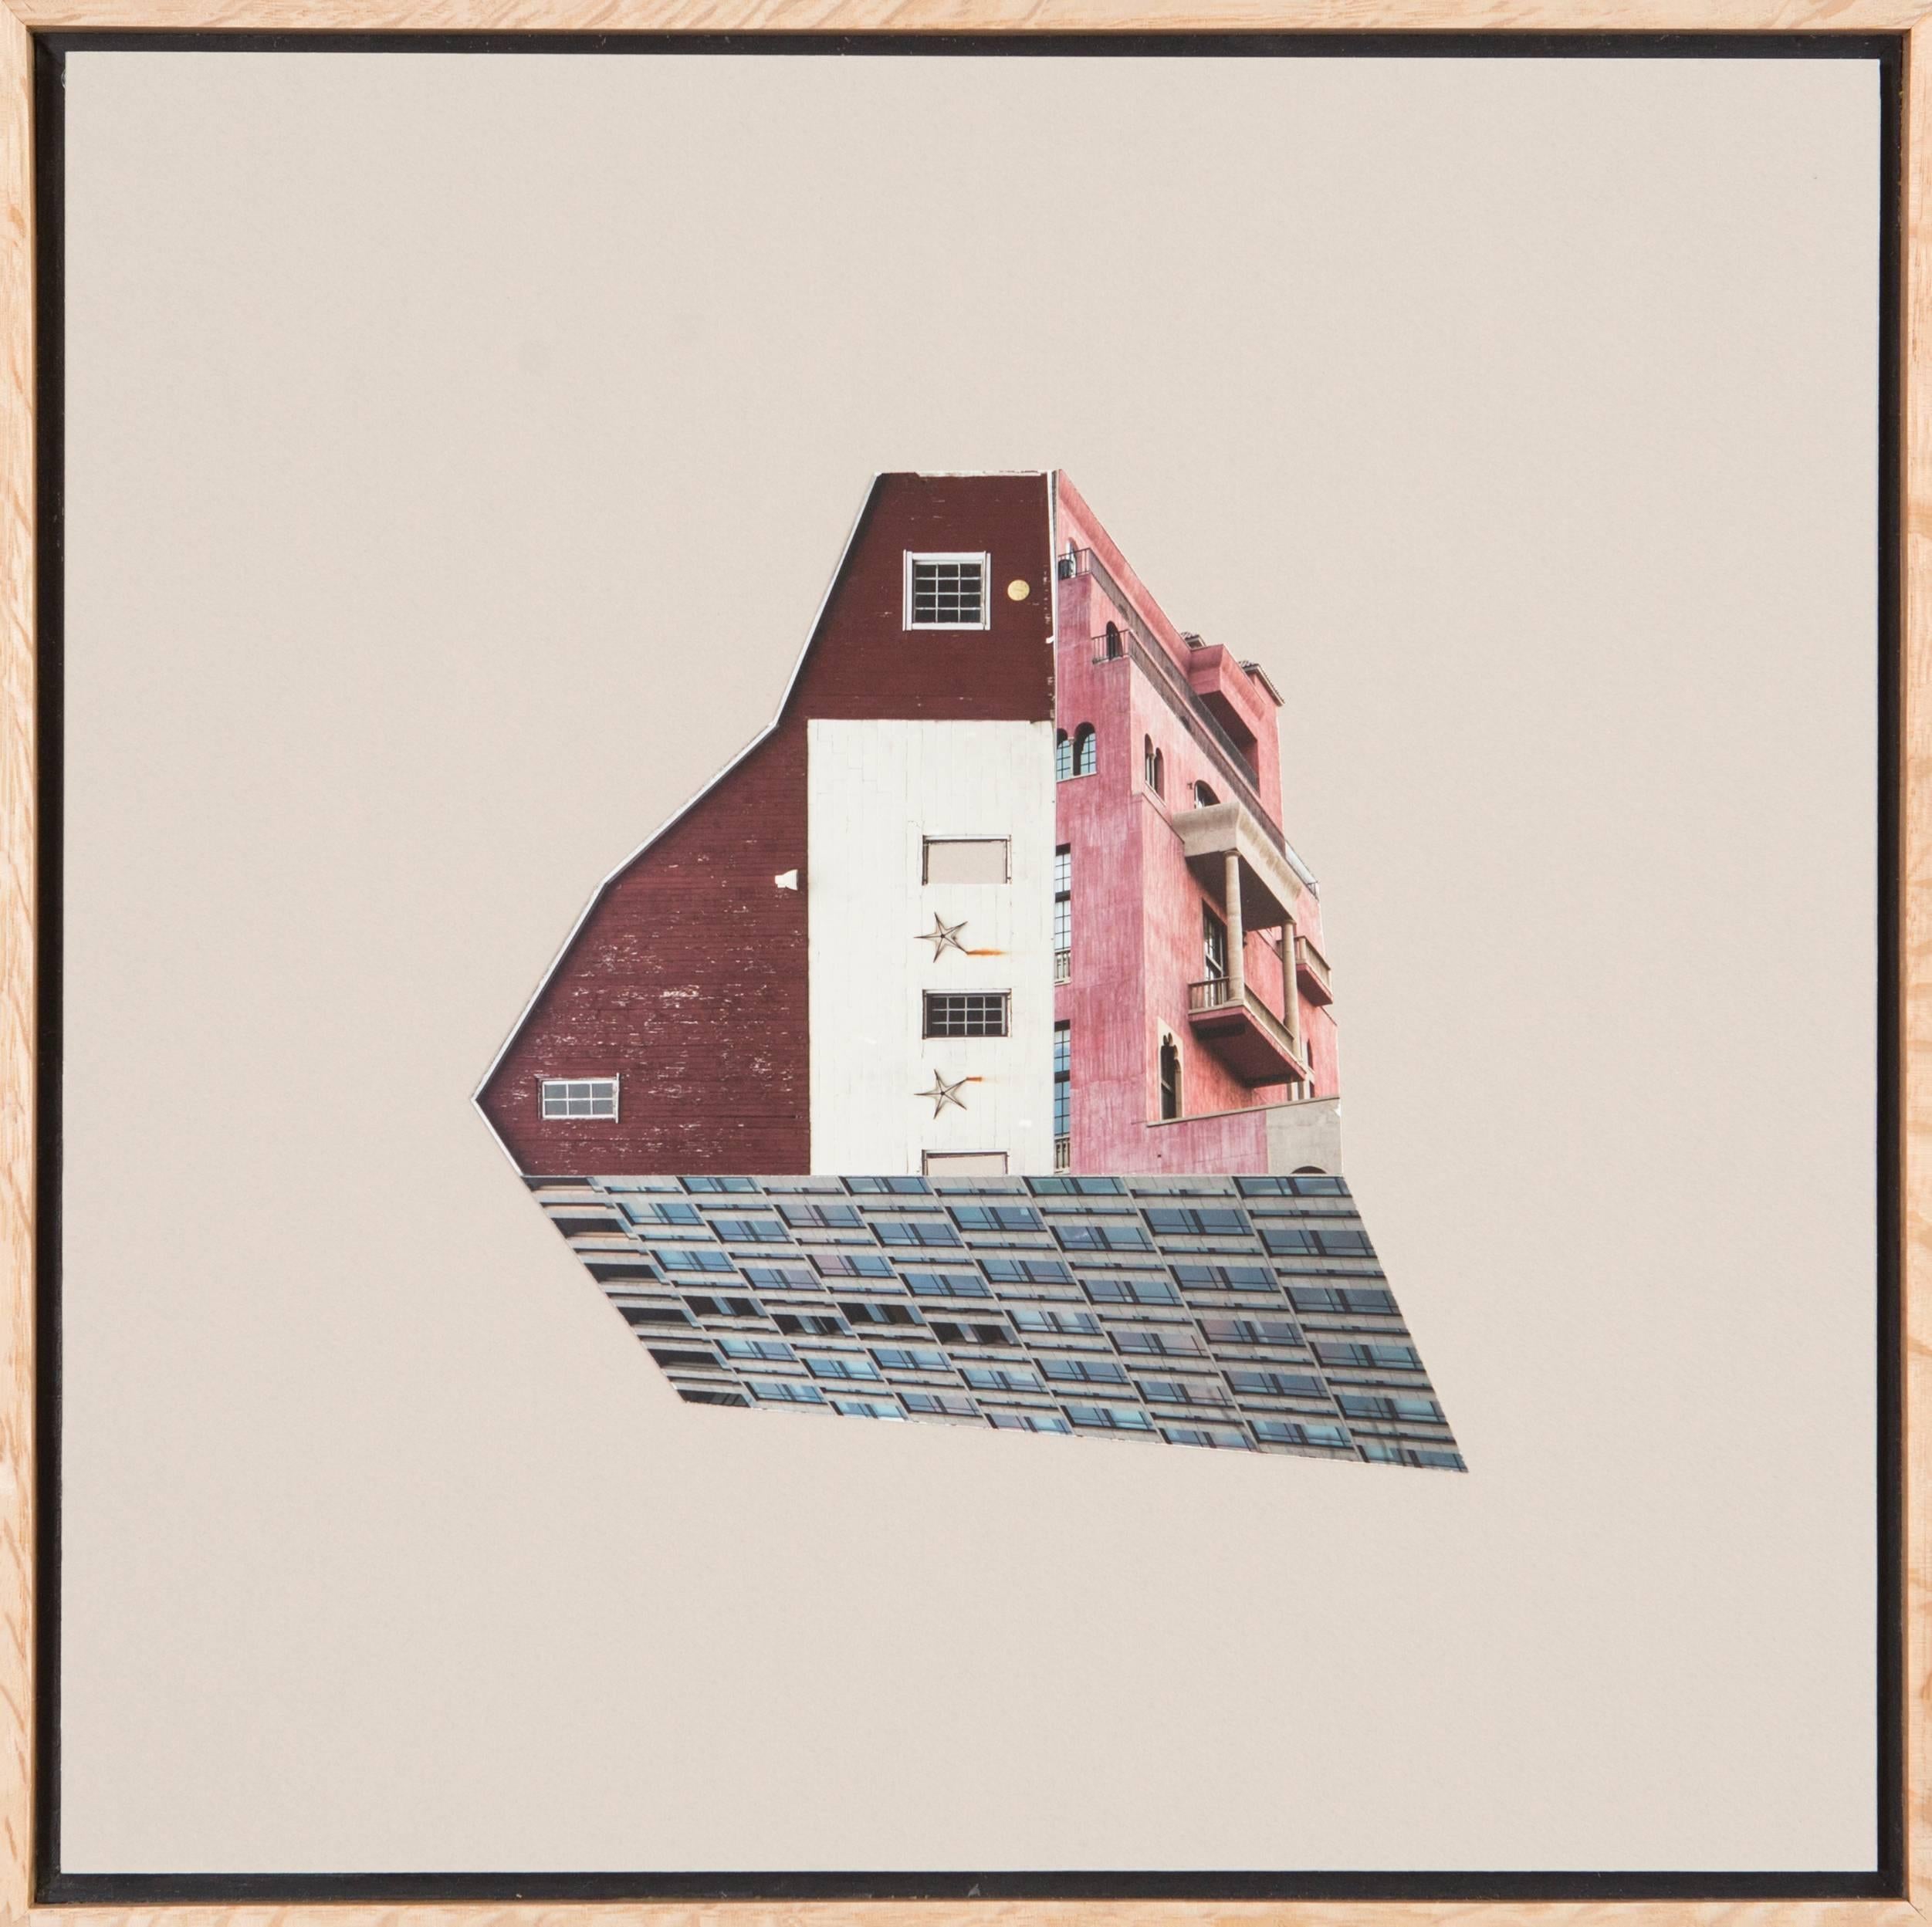 "Migrants 46" is a mixed media piece by Krista Svalbonas; it is part of Svalbonas' "Migrants" series. It is a photographic pigment print and collage on board. It is framed. Three seperate buildings of different styles and